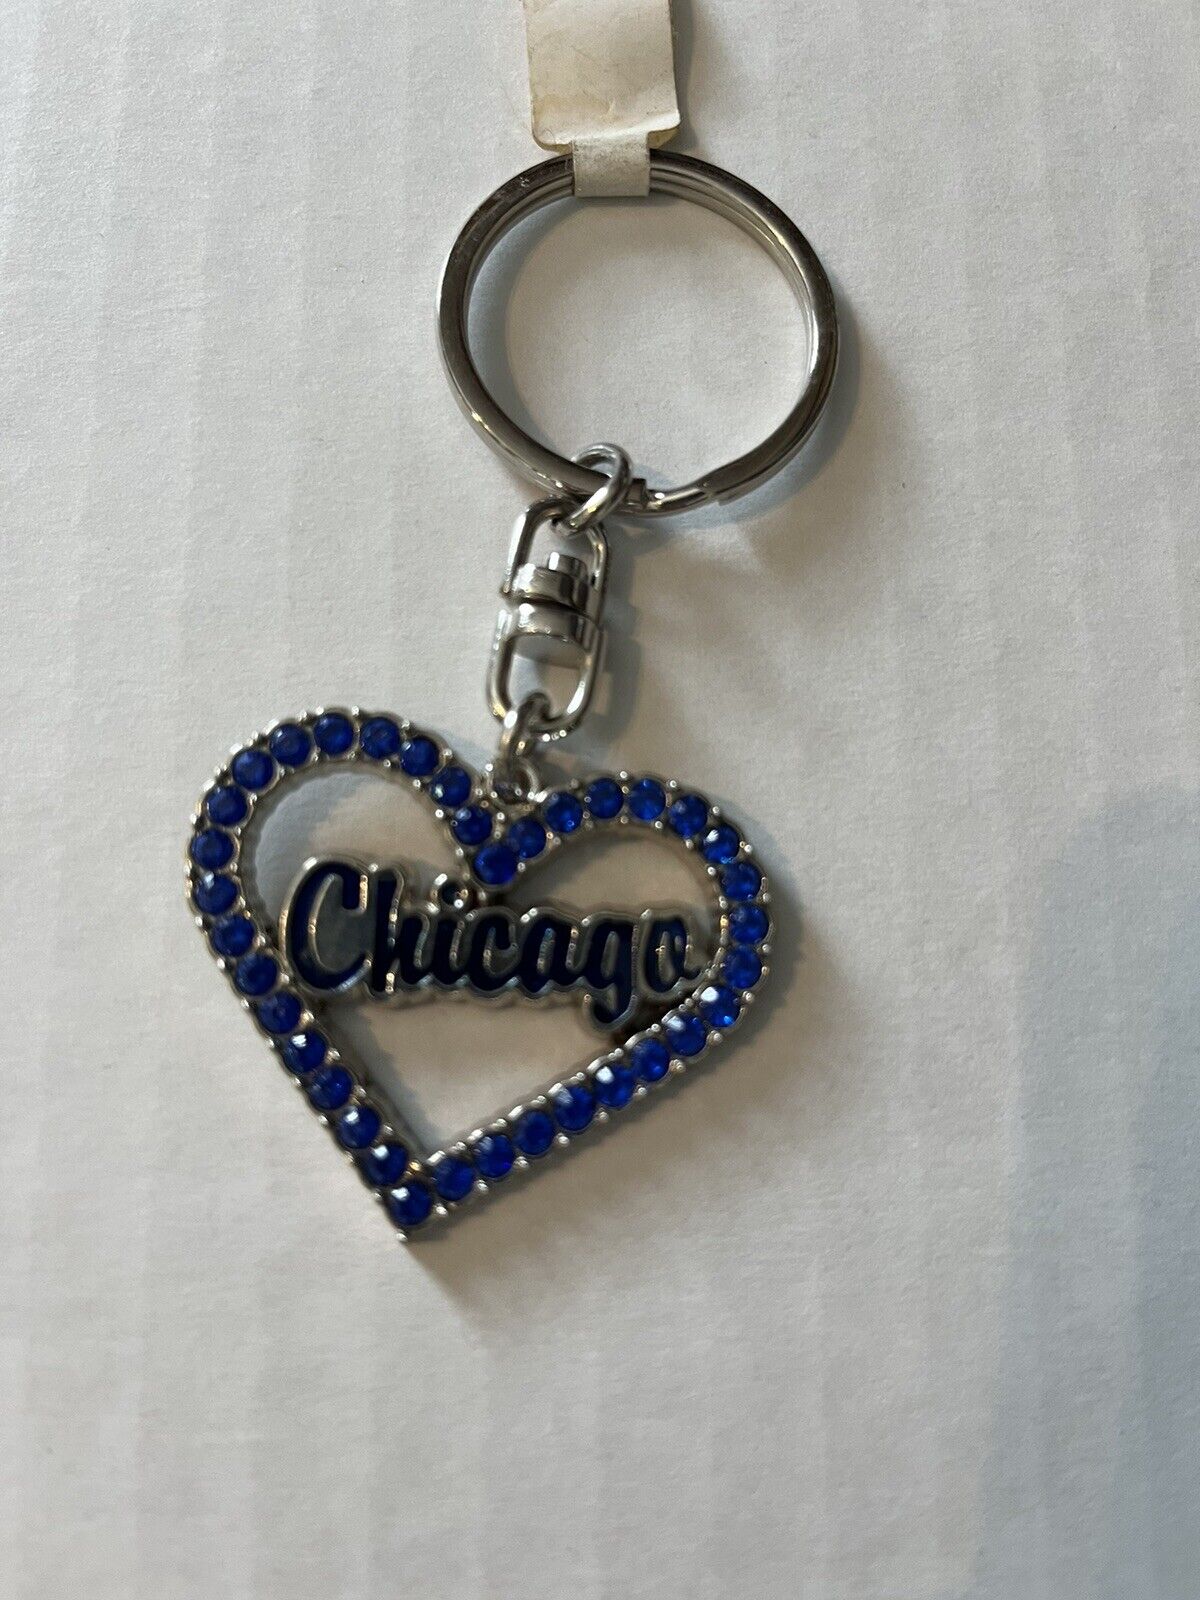 New Chicago heart shapped keychain with blue rhinestones